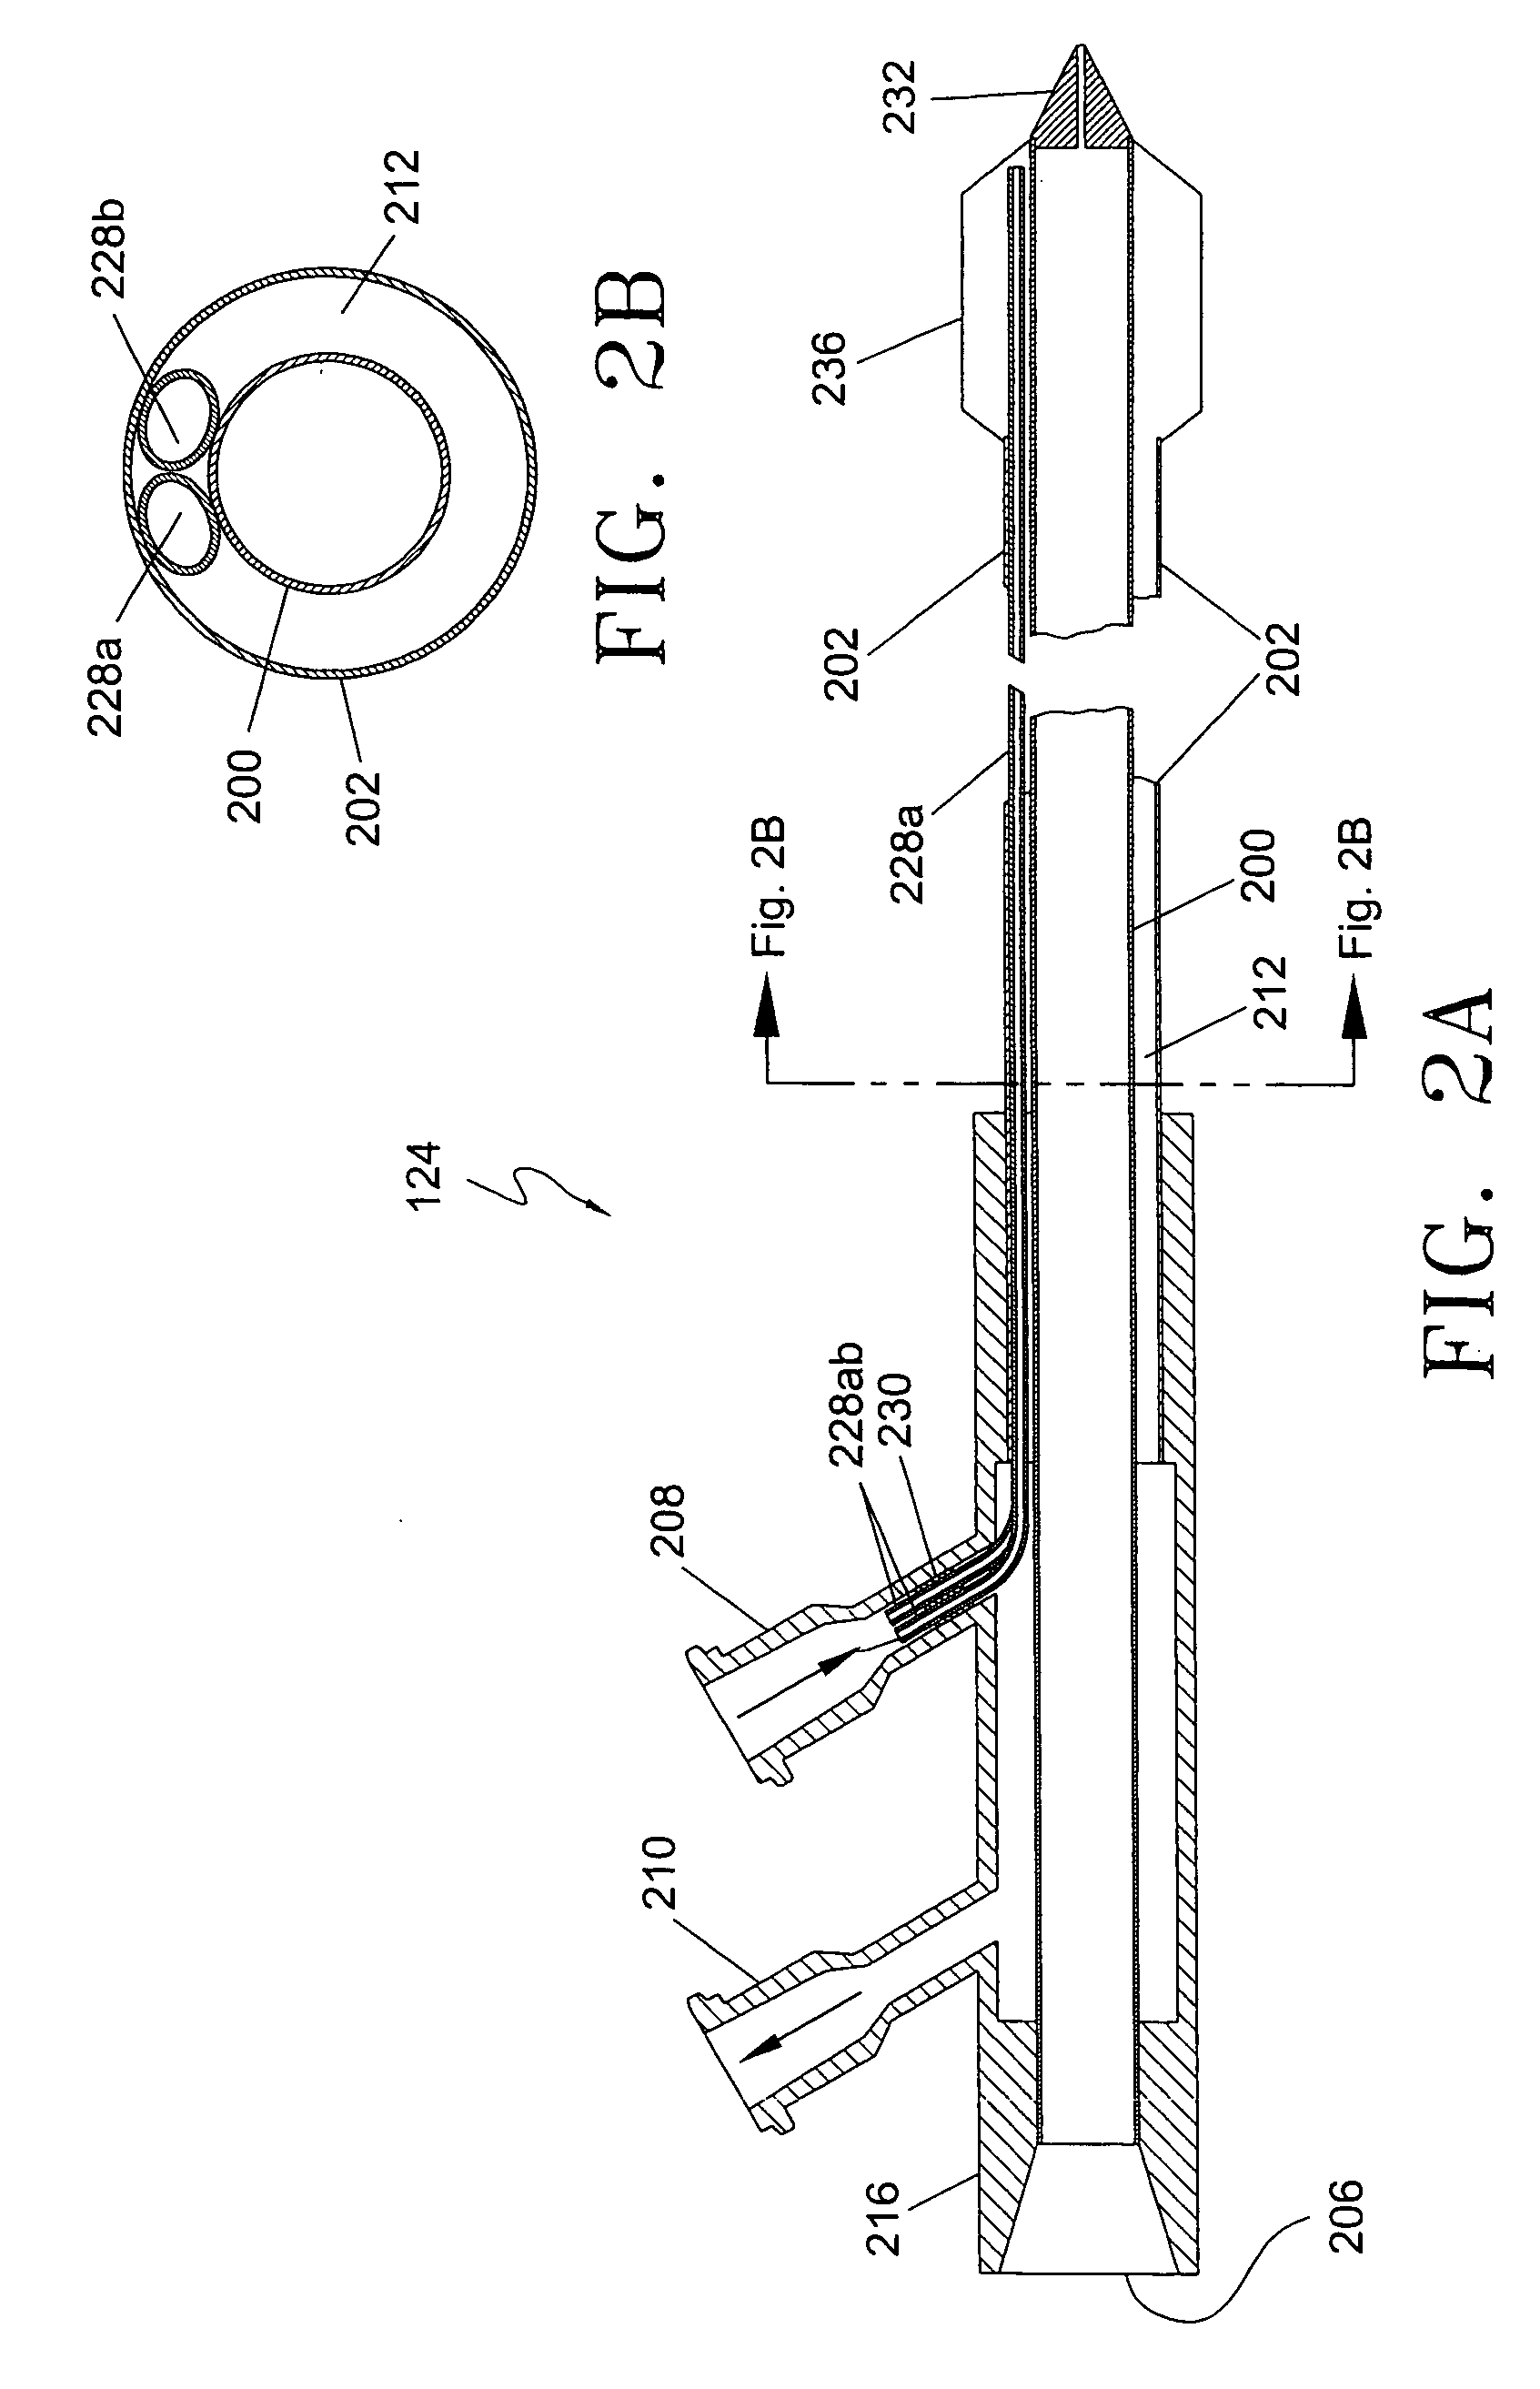 Interstitial microwave system and method for thermal treatment of diseases